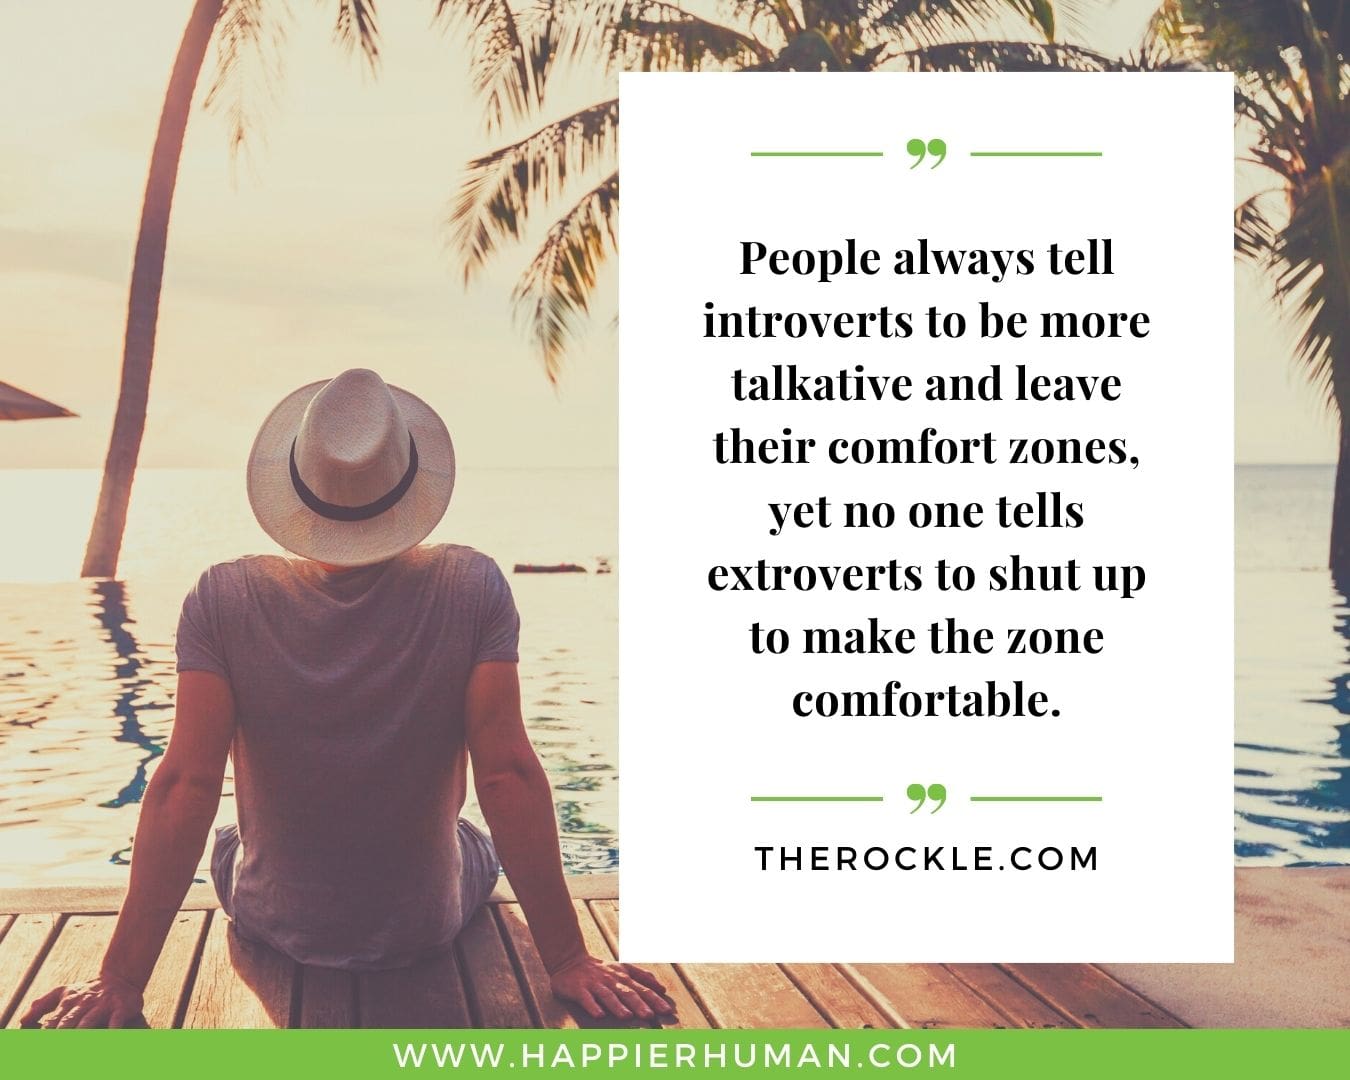 Introvert Quotes - “People always tell introverts to be more talkative and leave their comfort zones, yet no one tells extroverts to shut up to make the zone comfortable.” – TheRockle.com